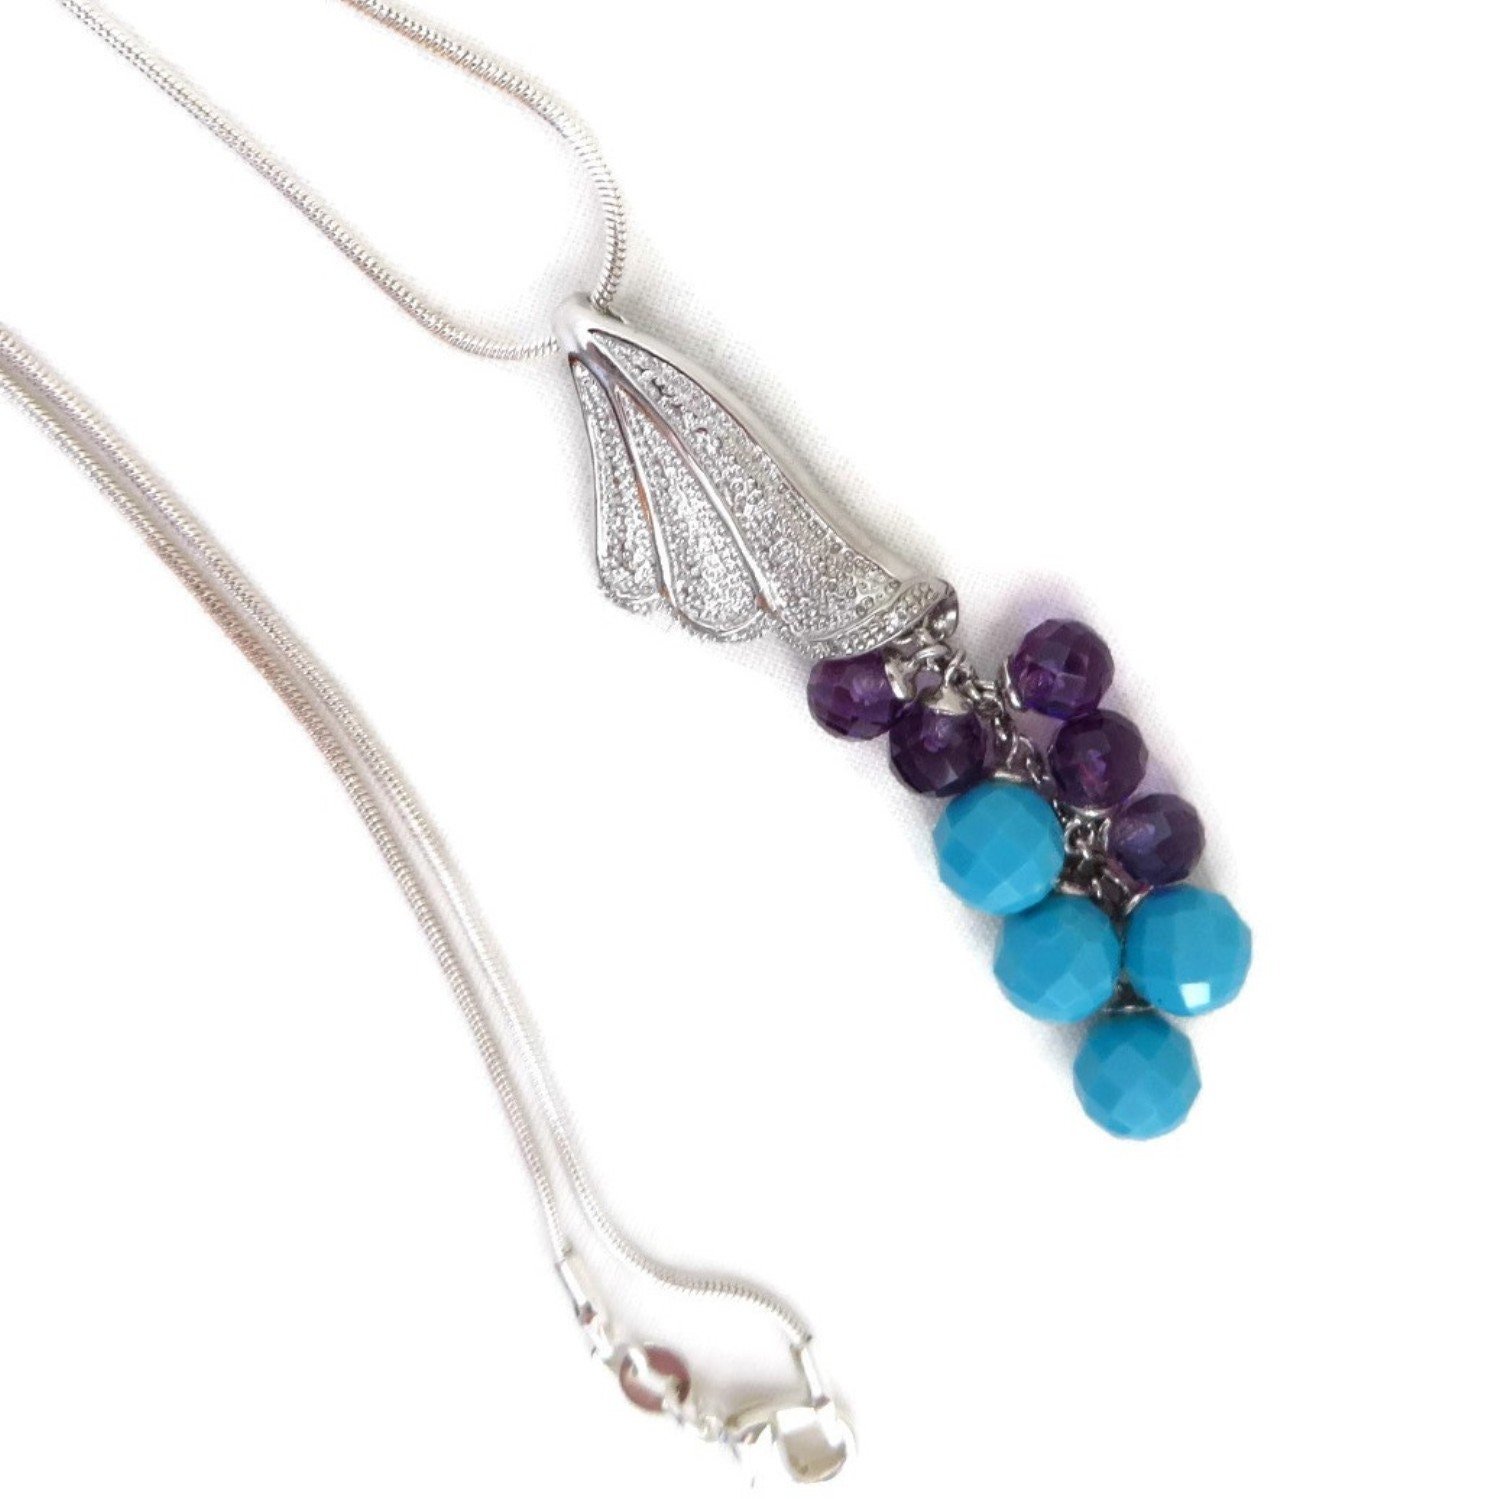 Dangling Beads Necklace, Fan Pendant with Beads, Sterling Silver Cobra Chain Necklace